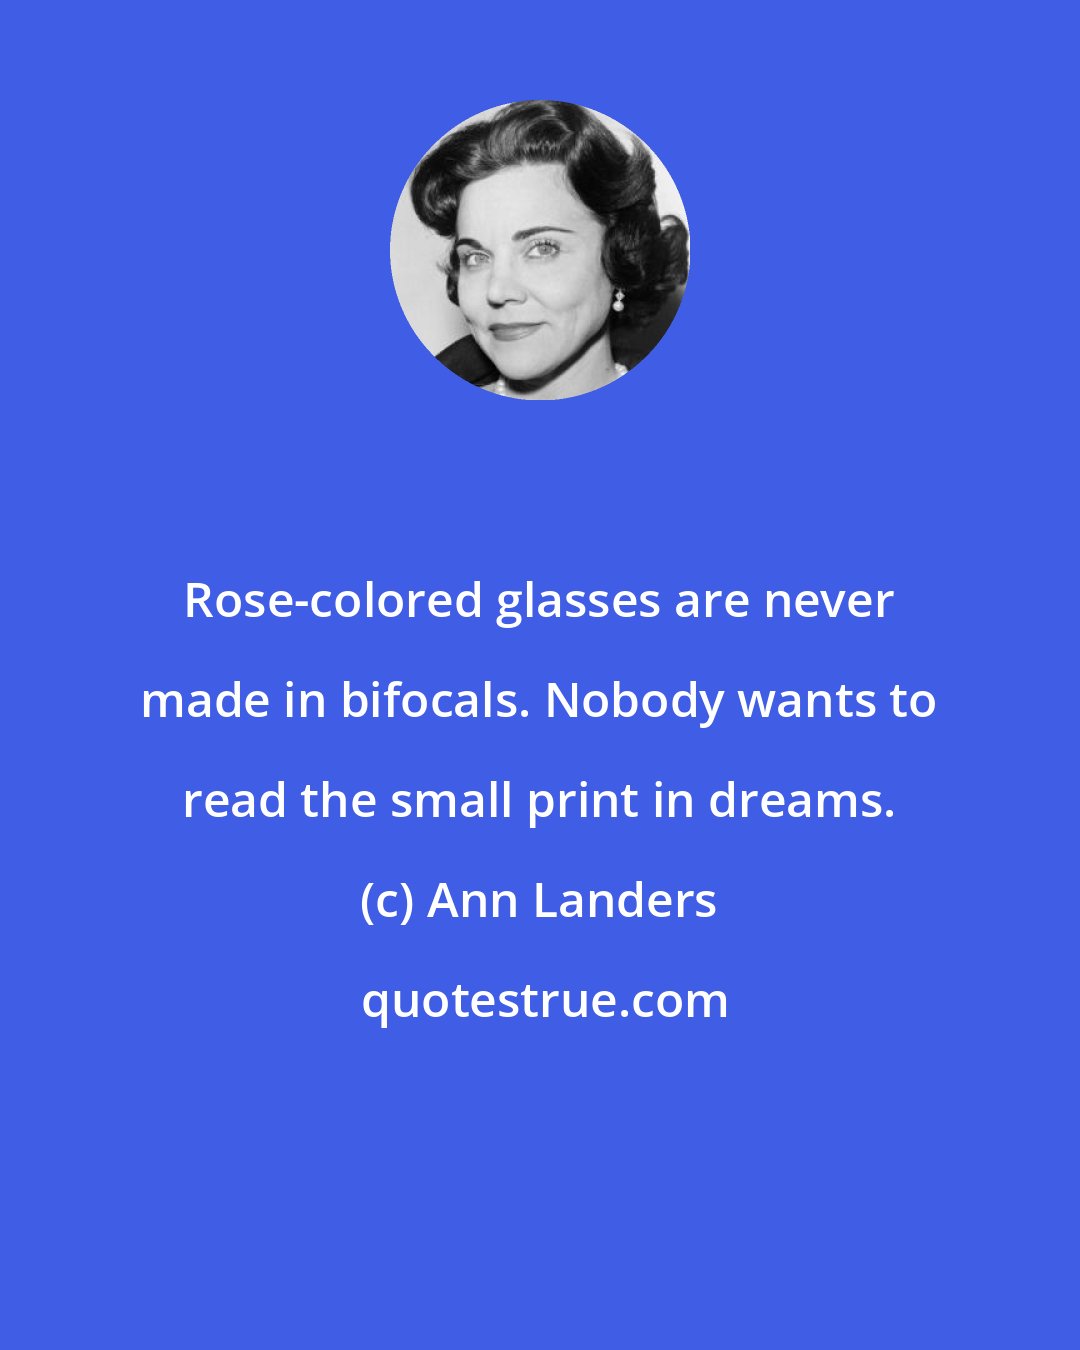 Ann Landers: Rose-colored glasses are never made in bifocals. Nobody wants to read the small print in dreams.